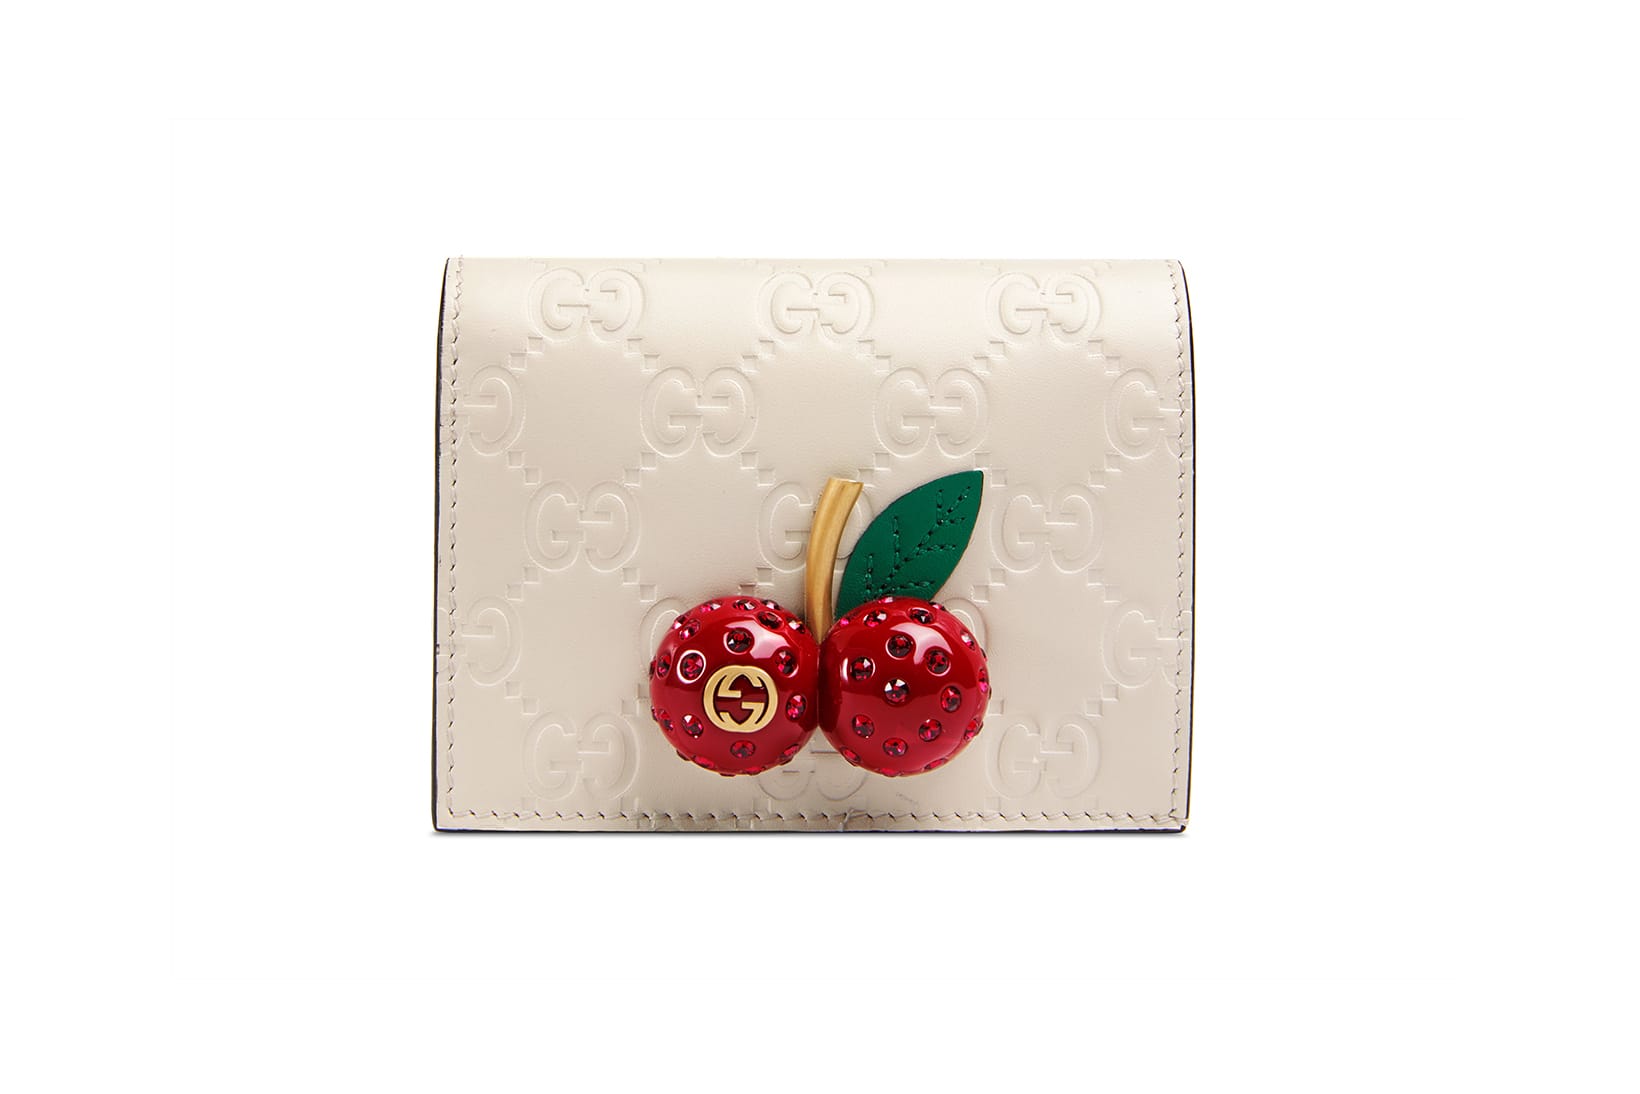 gucci bag with cherries